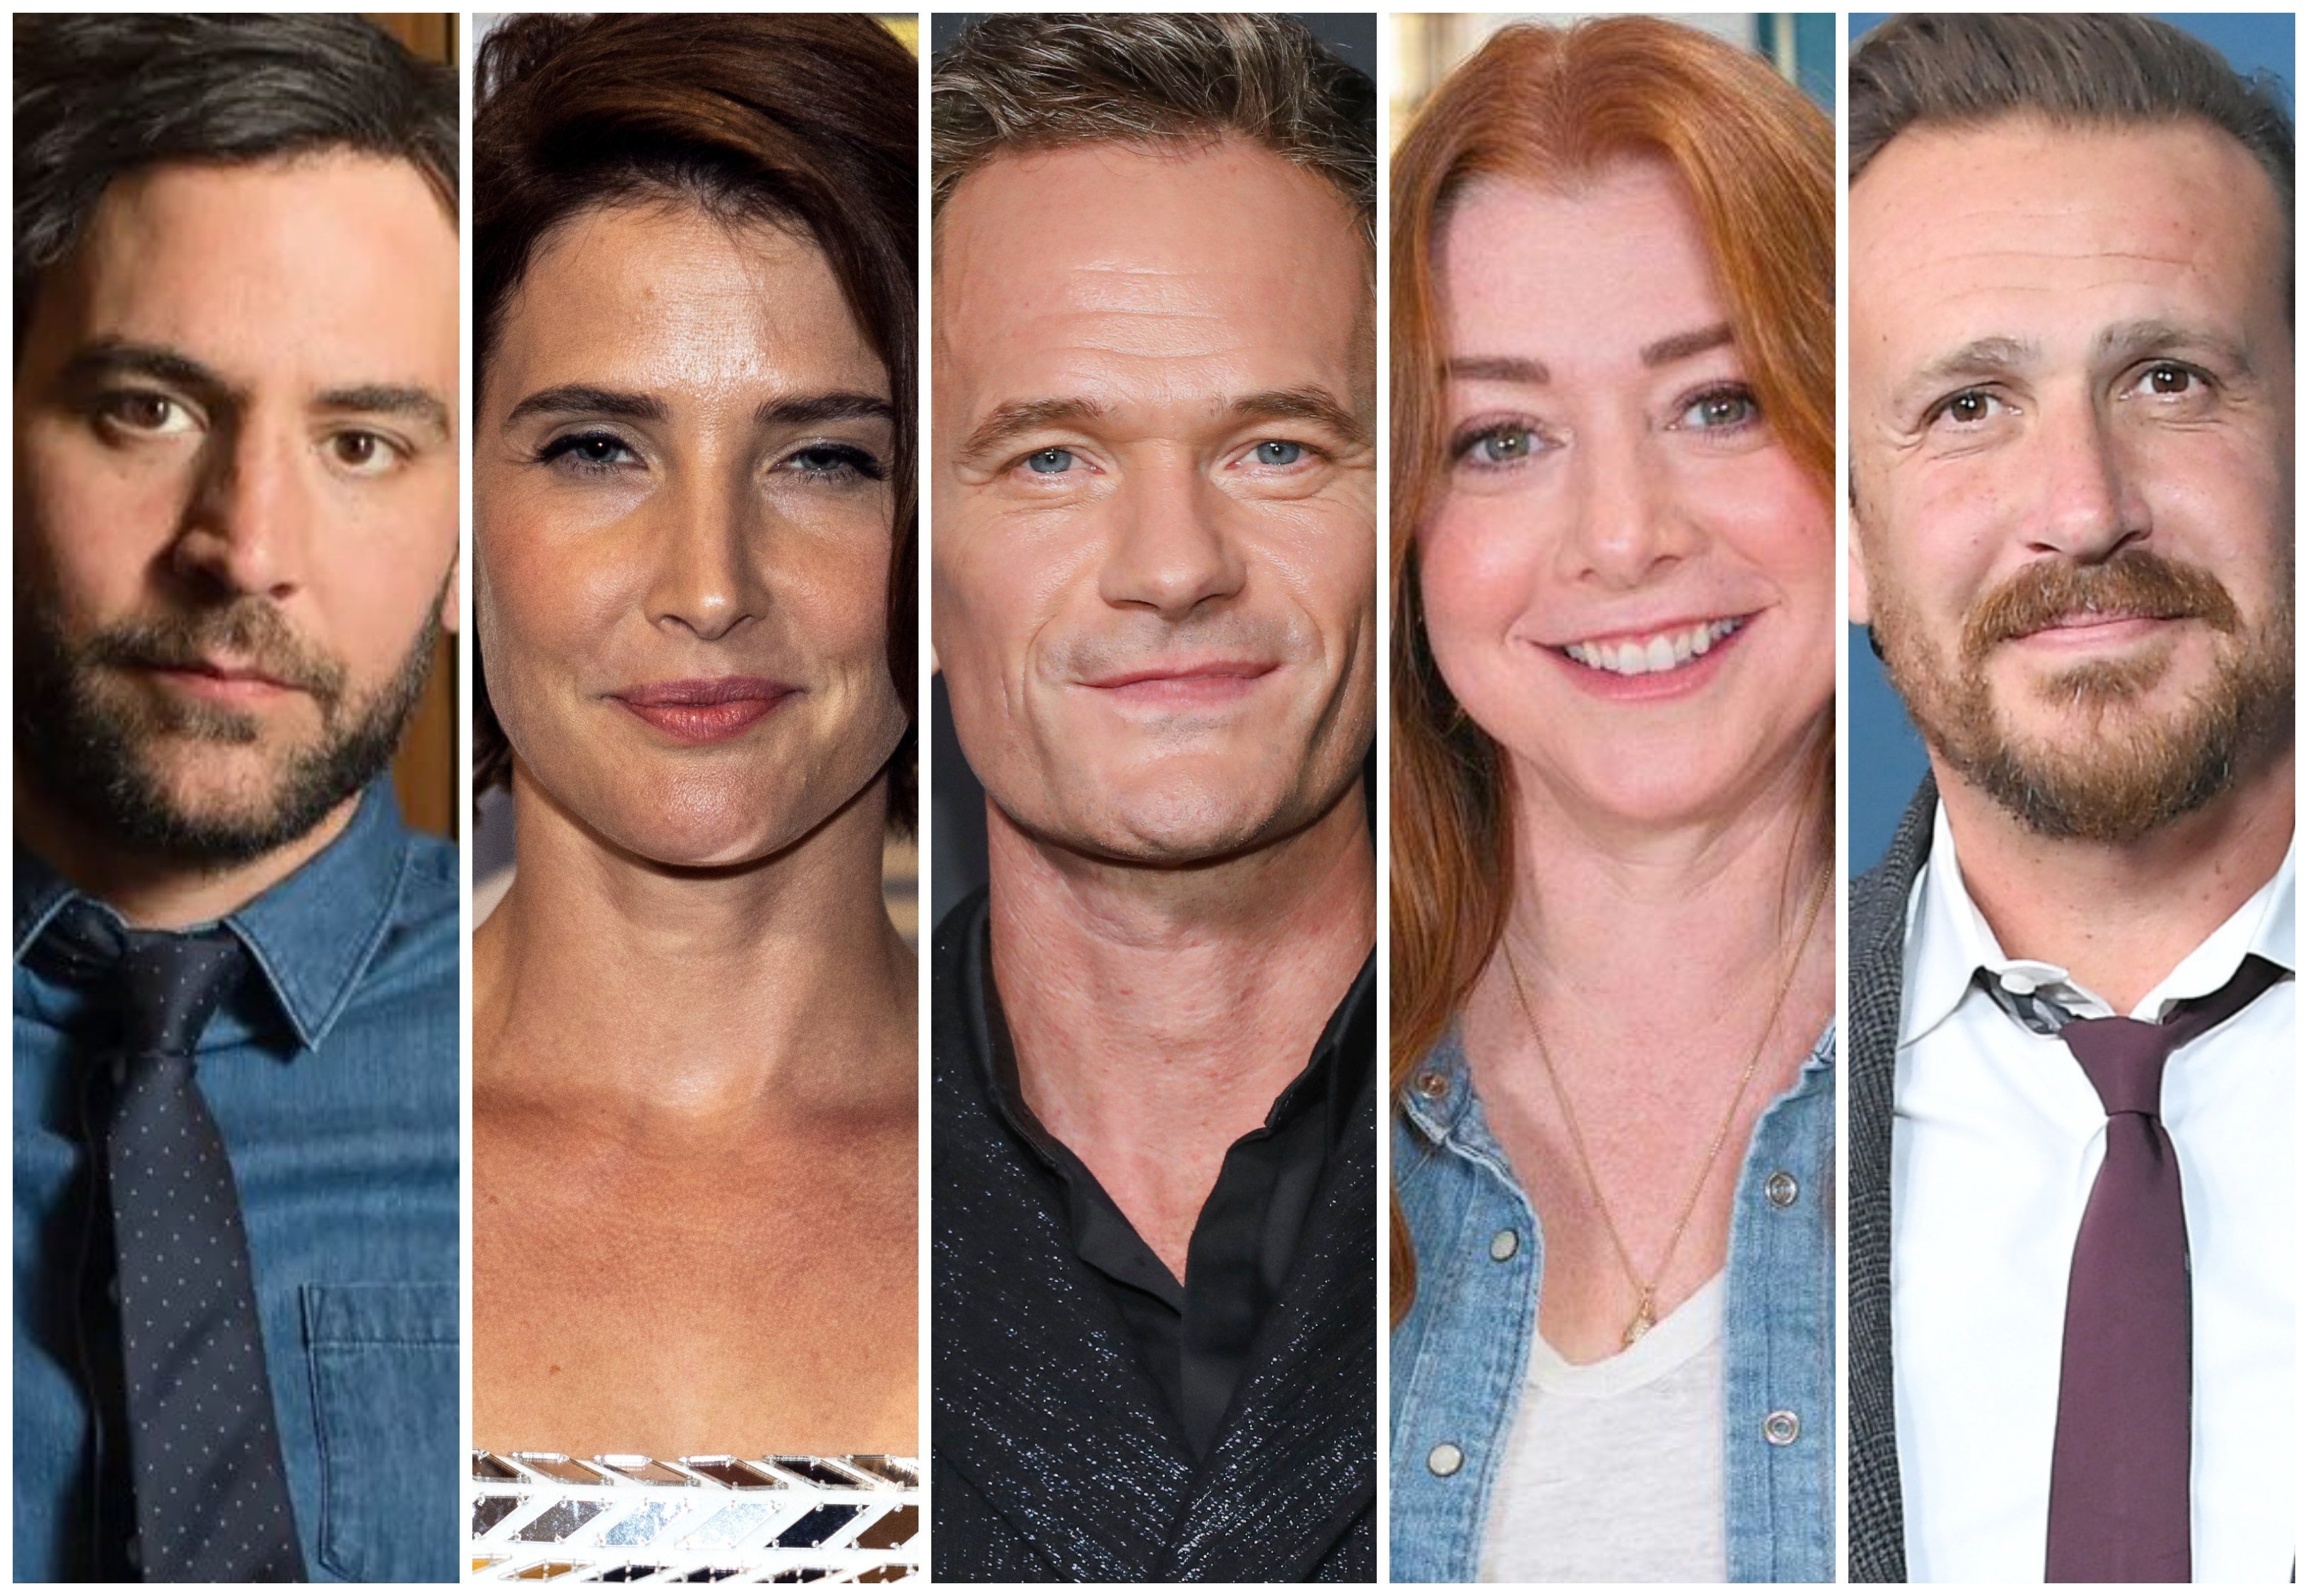 5 richest How I Met Your Mother actors – net worths, ranked: Neil